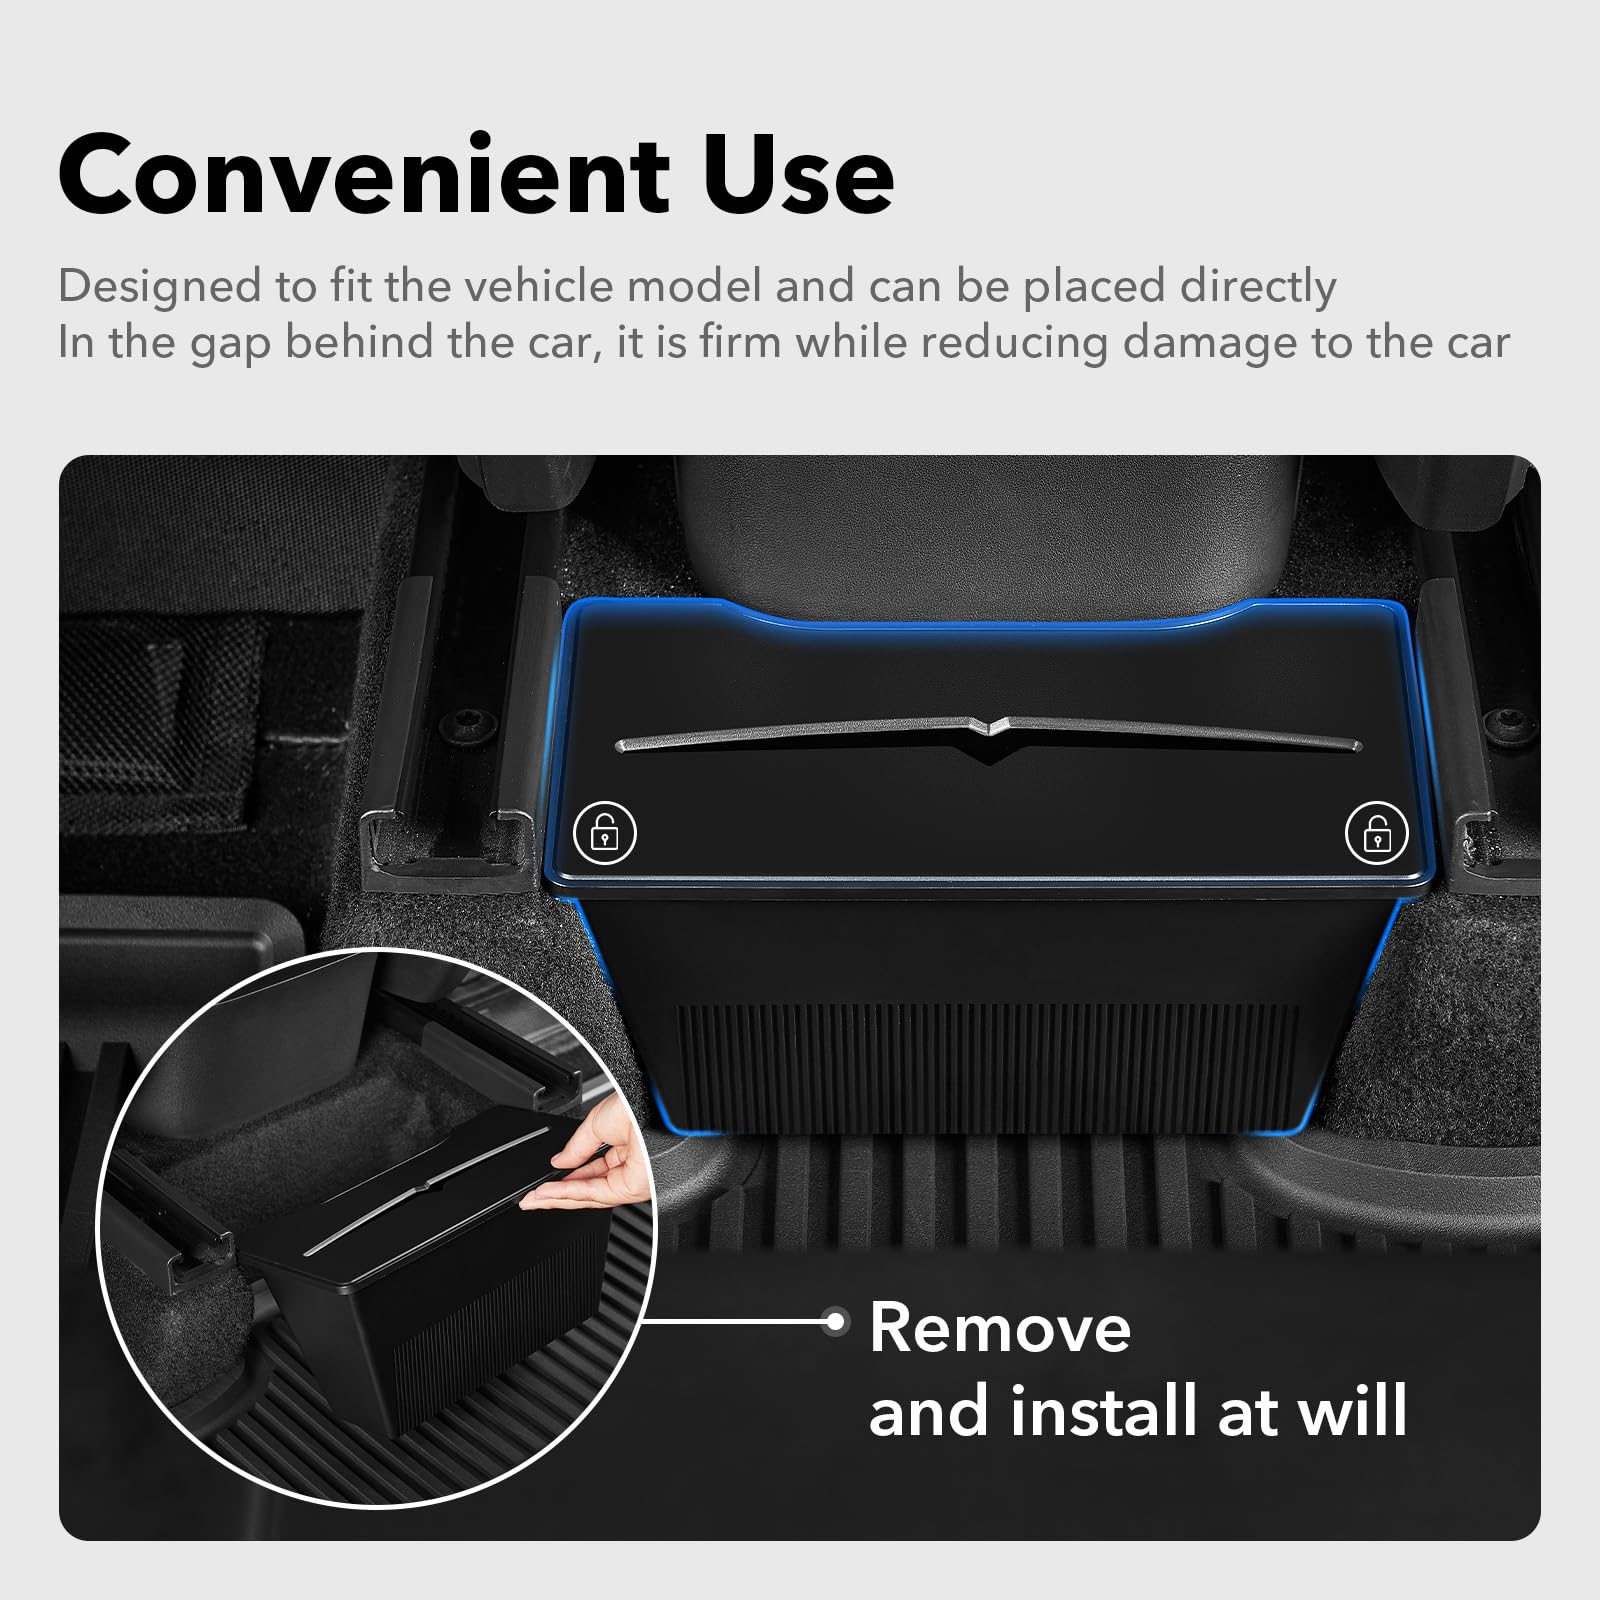 3W 2020 2021 2022 Tesla Model Y Accessories-2Pcs Under Seat Storage Box 2Pcs Rear Trunk Organizer Side Storage Box with Lids Rear Center Console Storage Bin TPE Waterproof Odorless Protector Packets Vehicles & Parts 3Wliners   